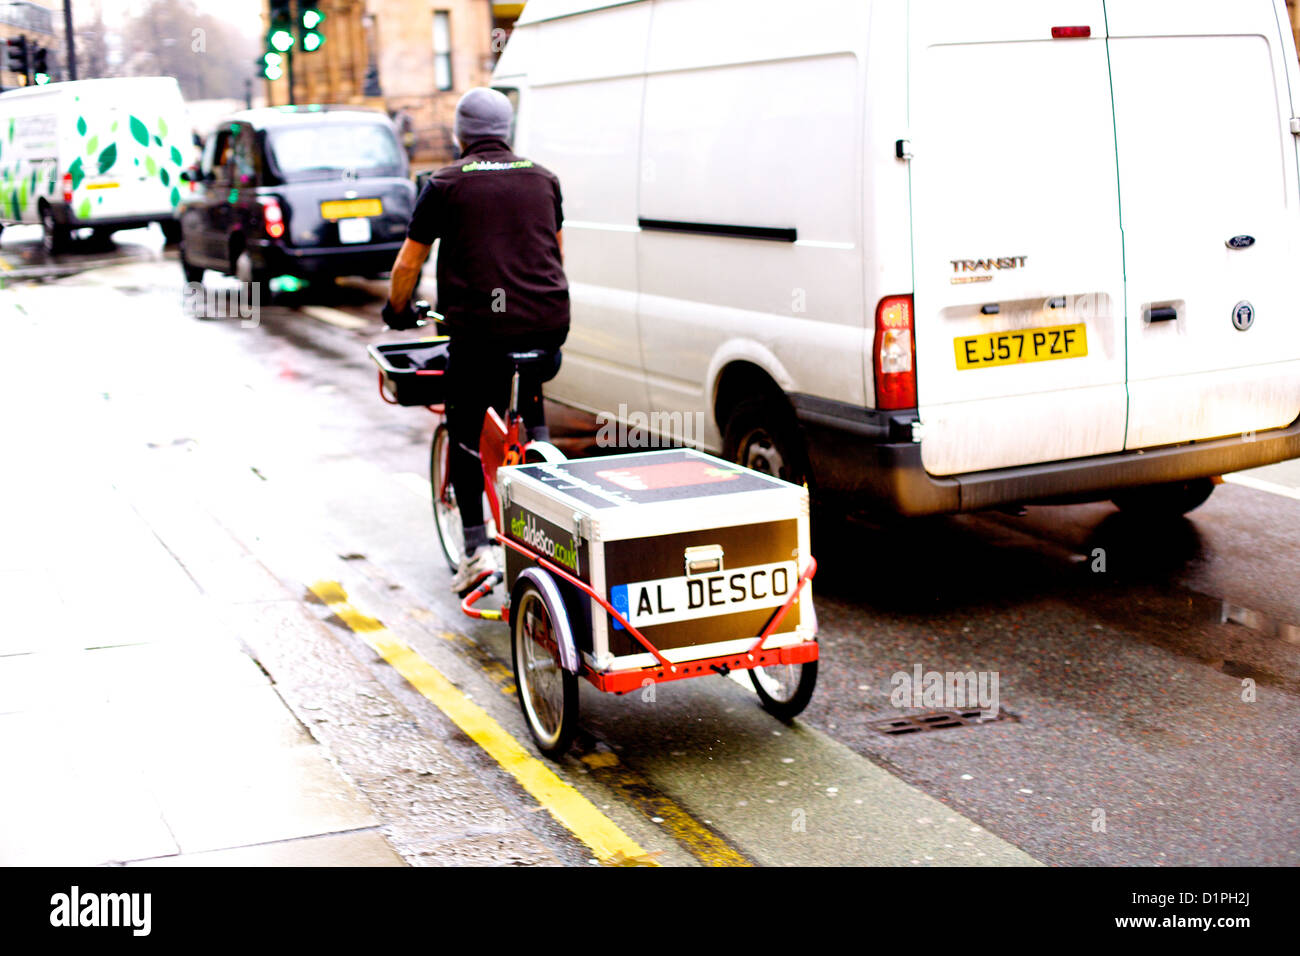 Bicycle sandwich delivery man on a street in central London, next to a white van Stock Photo